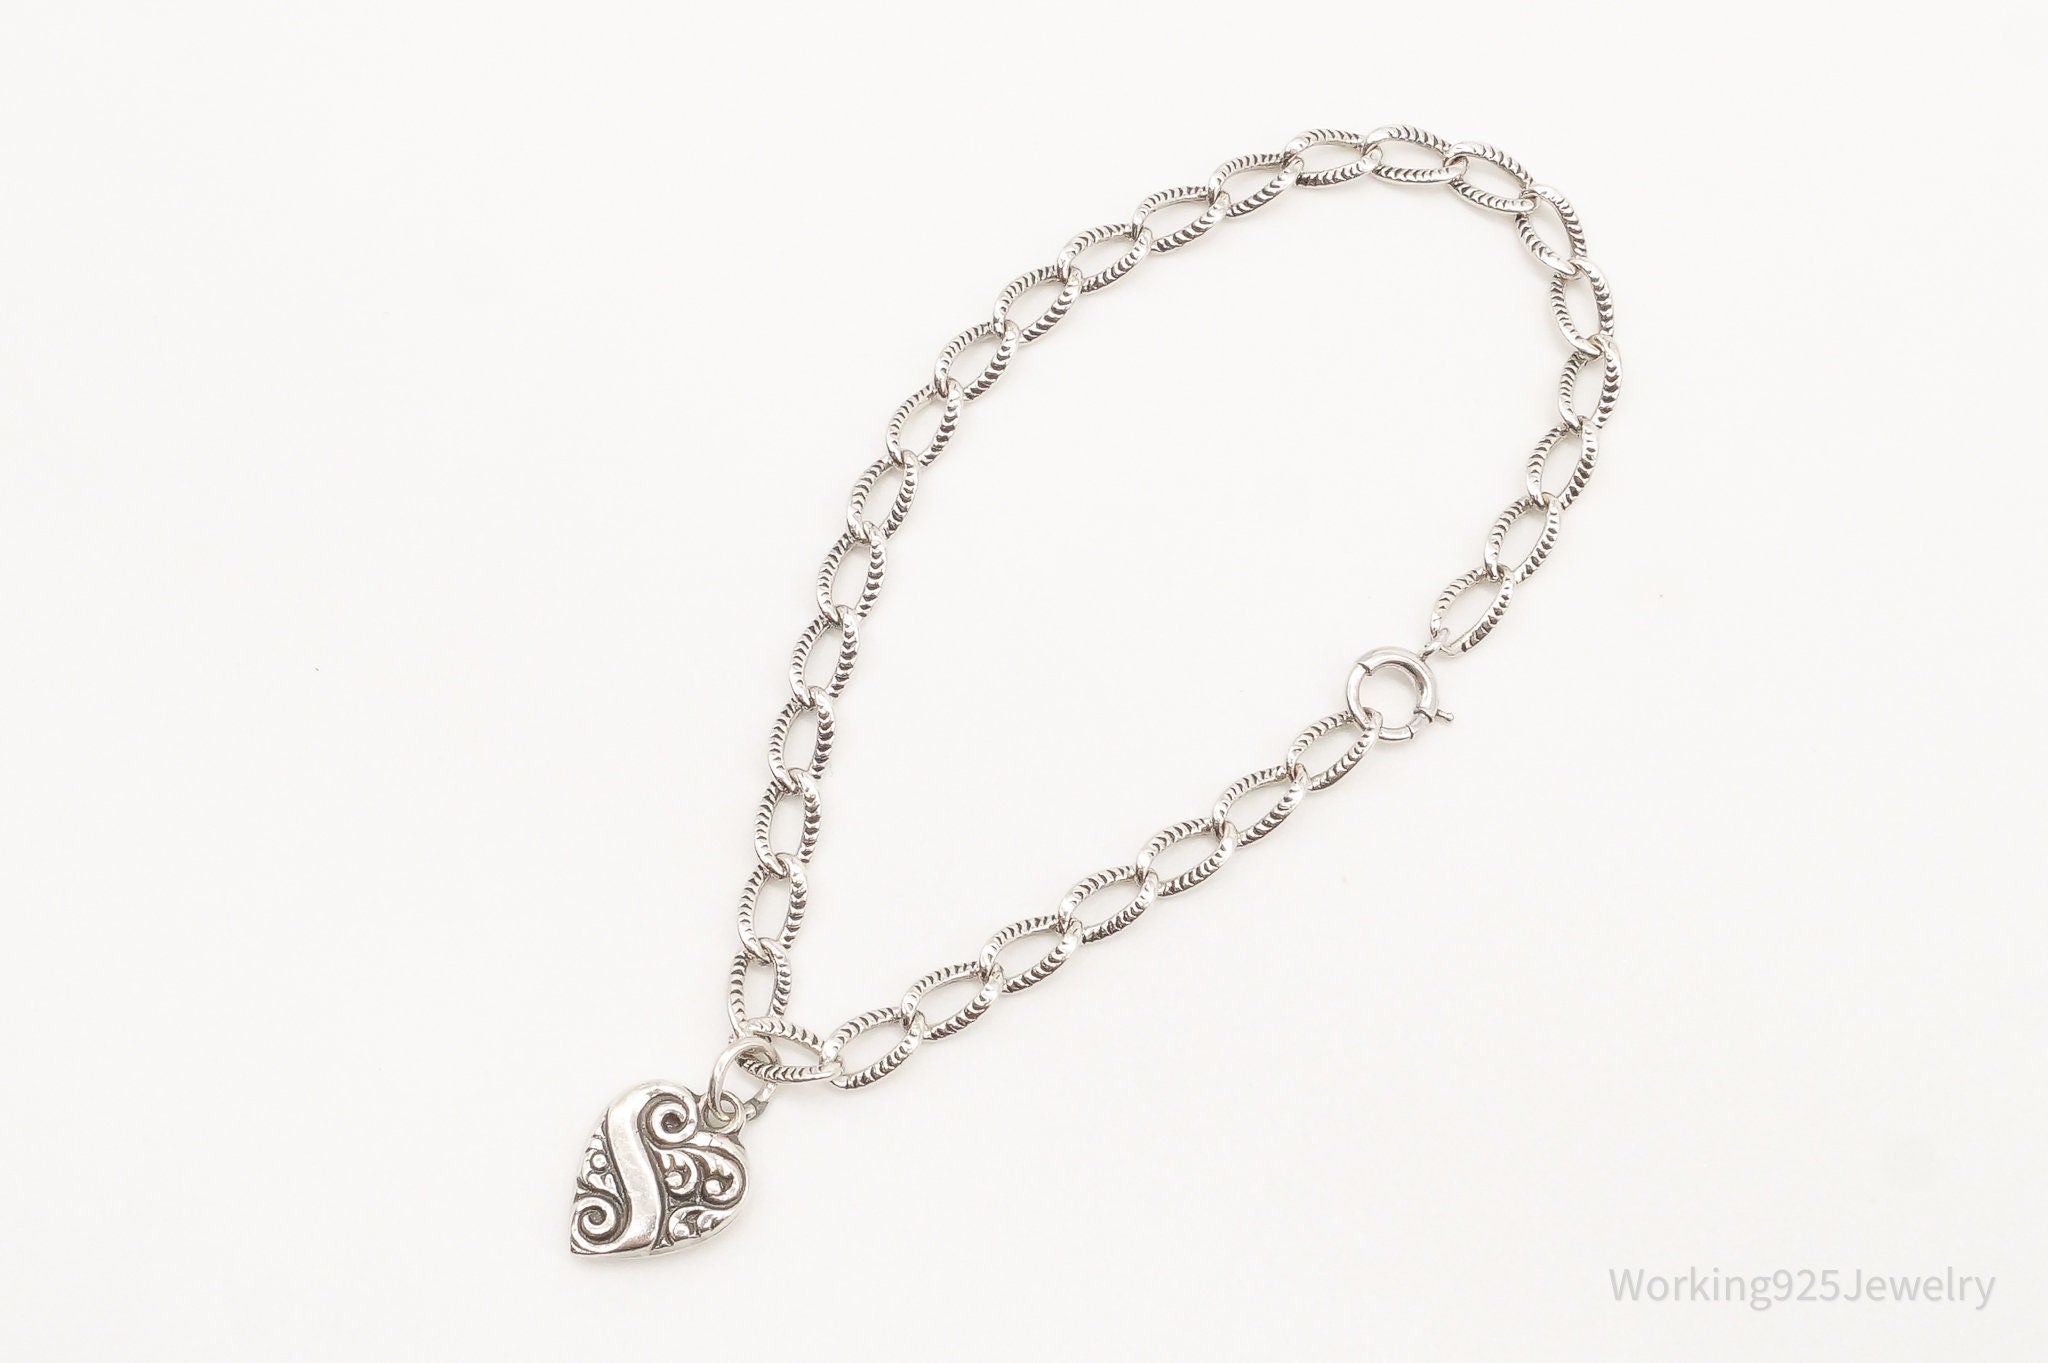 Antique Puffy Heart Charm Sterling Silver Charm Bracelet